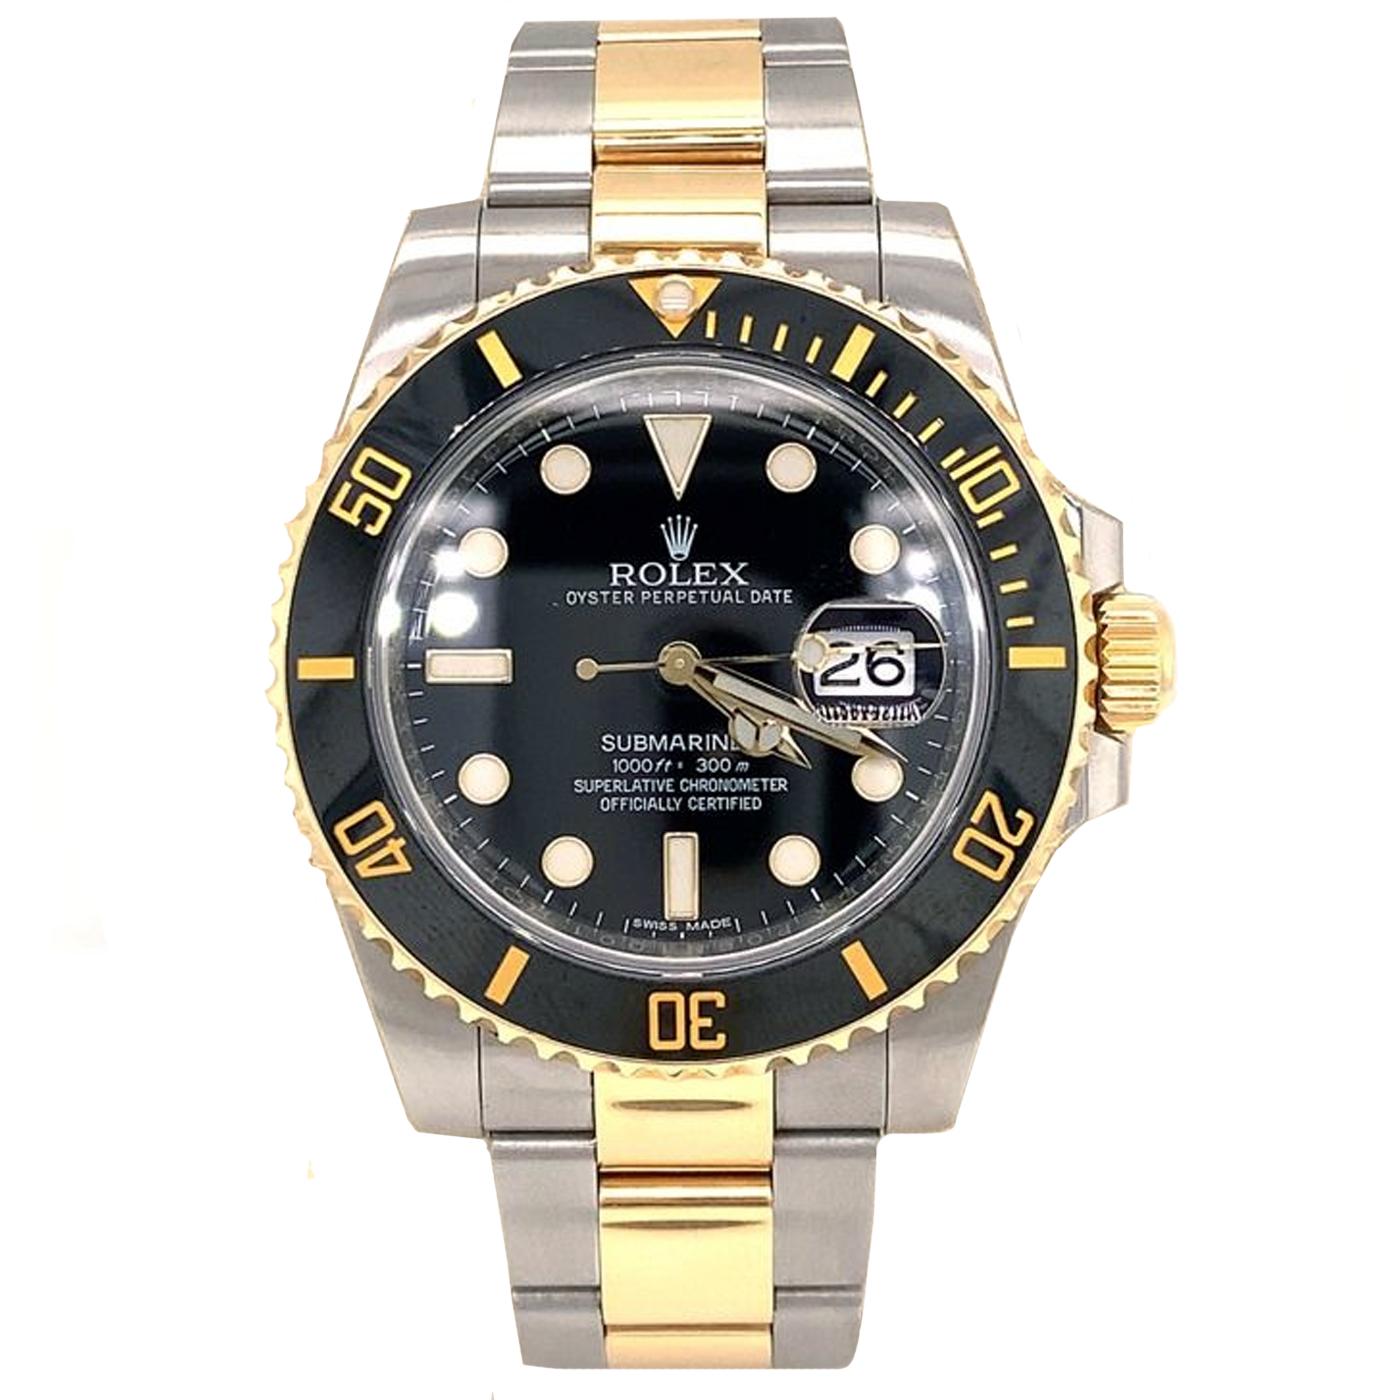 Rolex Submariner Date 116613LN men watch. Features a yellow case and oyster bracelet which is a combination of oyster steel and 18 ct yellow gold. The unidirectional rotating bezel has a black ceramic insert with a 60-minute scale that has